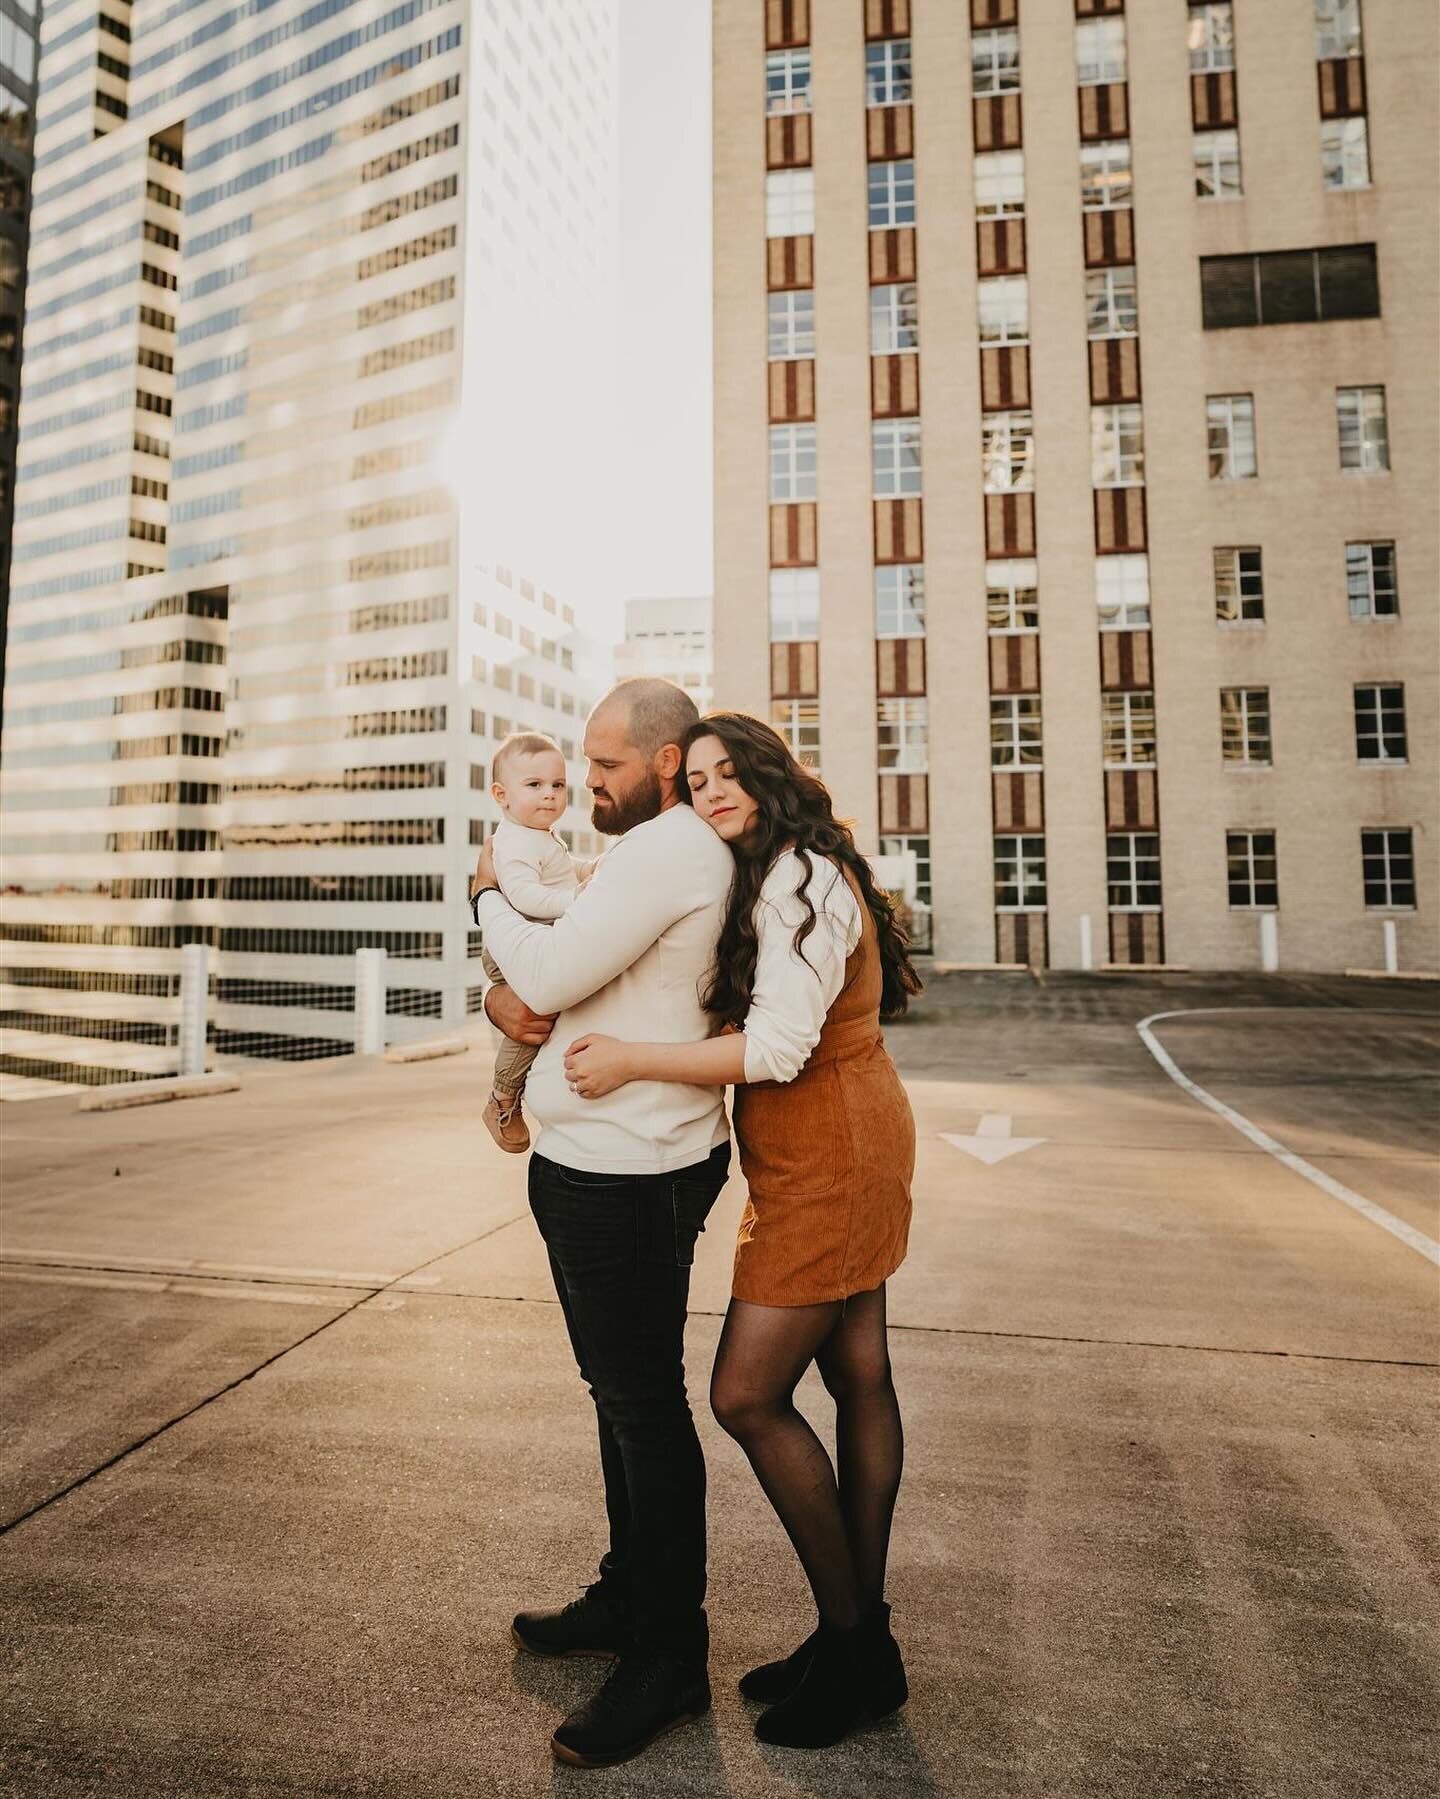 From engaged, to wedding, to anniversary, to pregnancy, and now to family 🥹 we&rsquo;ve seen it all! Just feeling so lucky and grateful today.

And y&rsquo;all know I&rsquo;m a nature gal but this sun-soaked downtown session was just a whole vibe 🖤